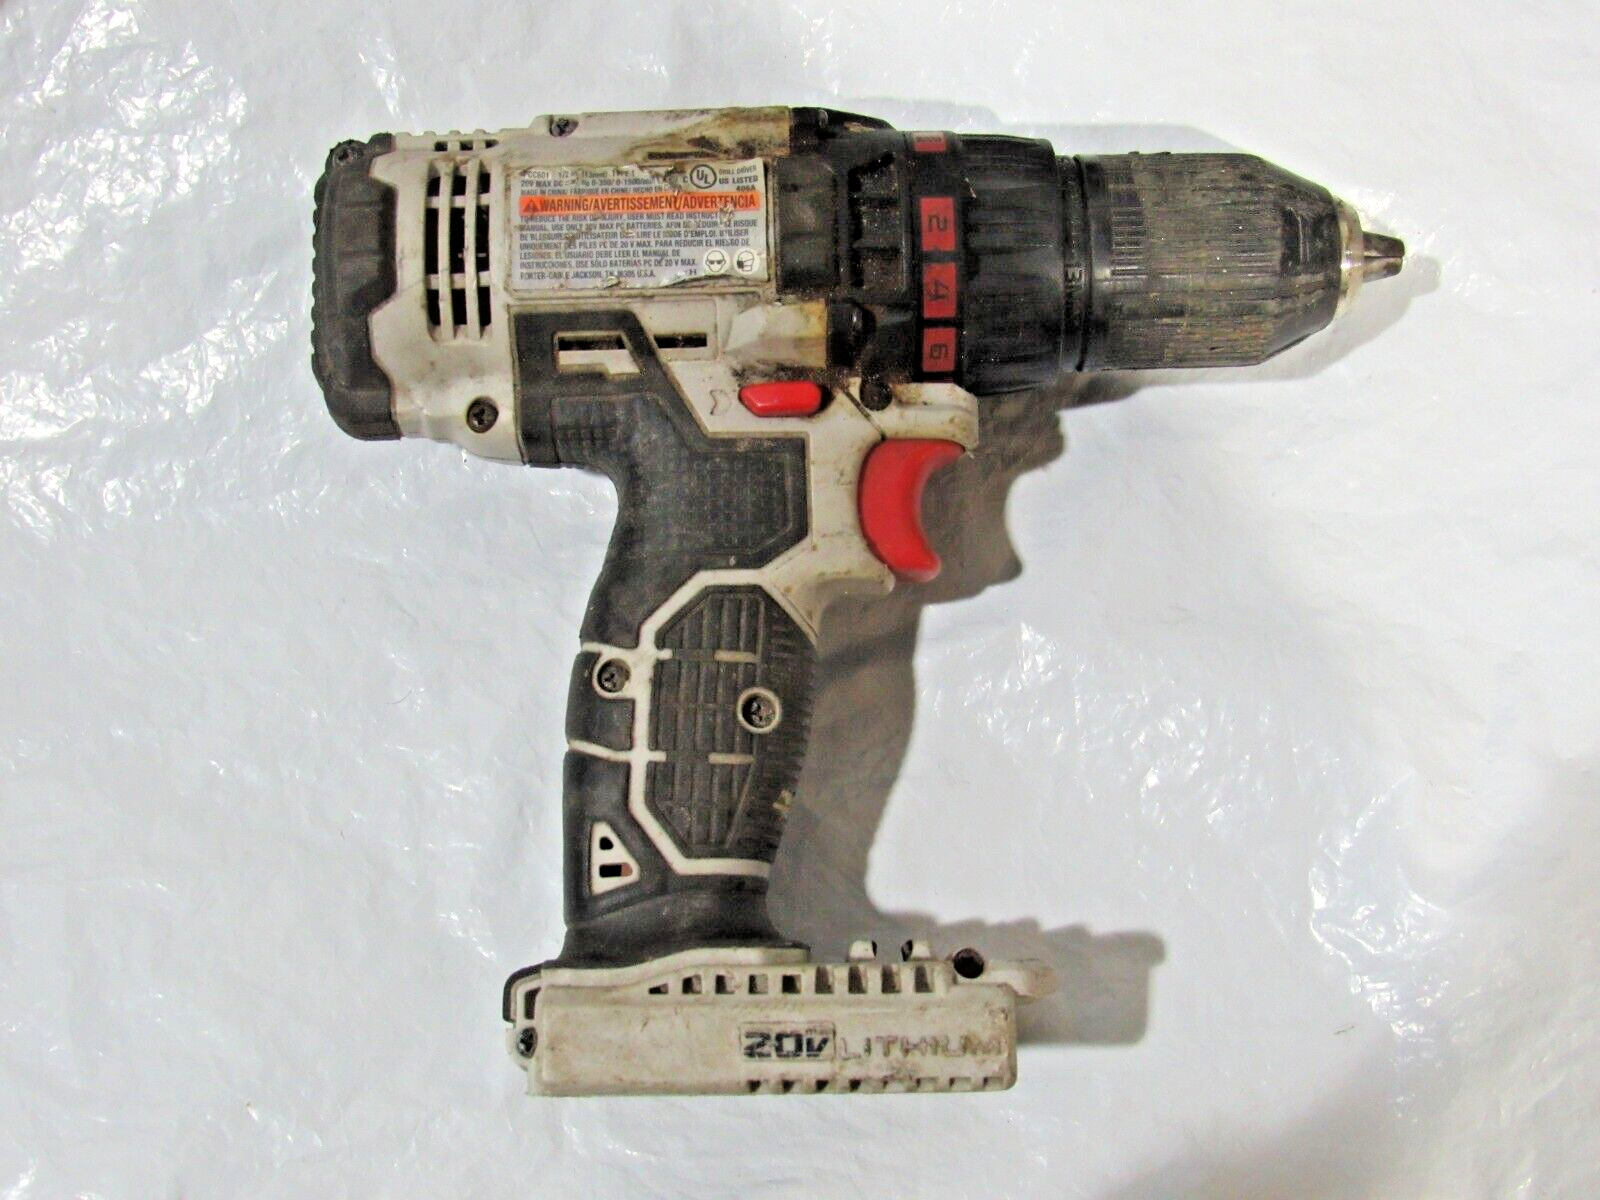 Porter Cable PCC601 1/2" Drill Driver (Tool only) Untested - $49.99